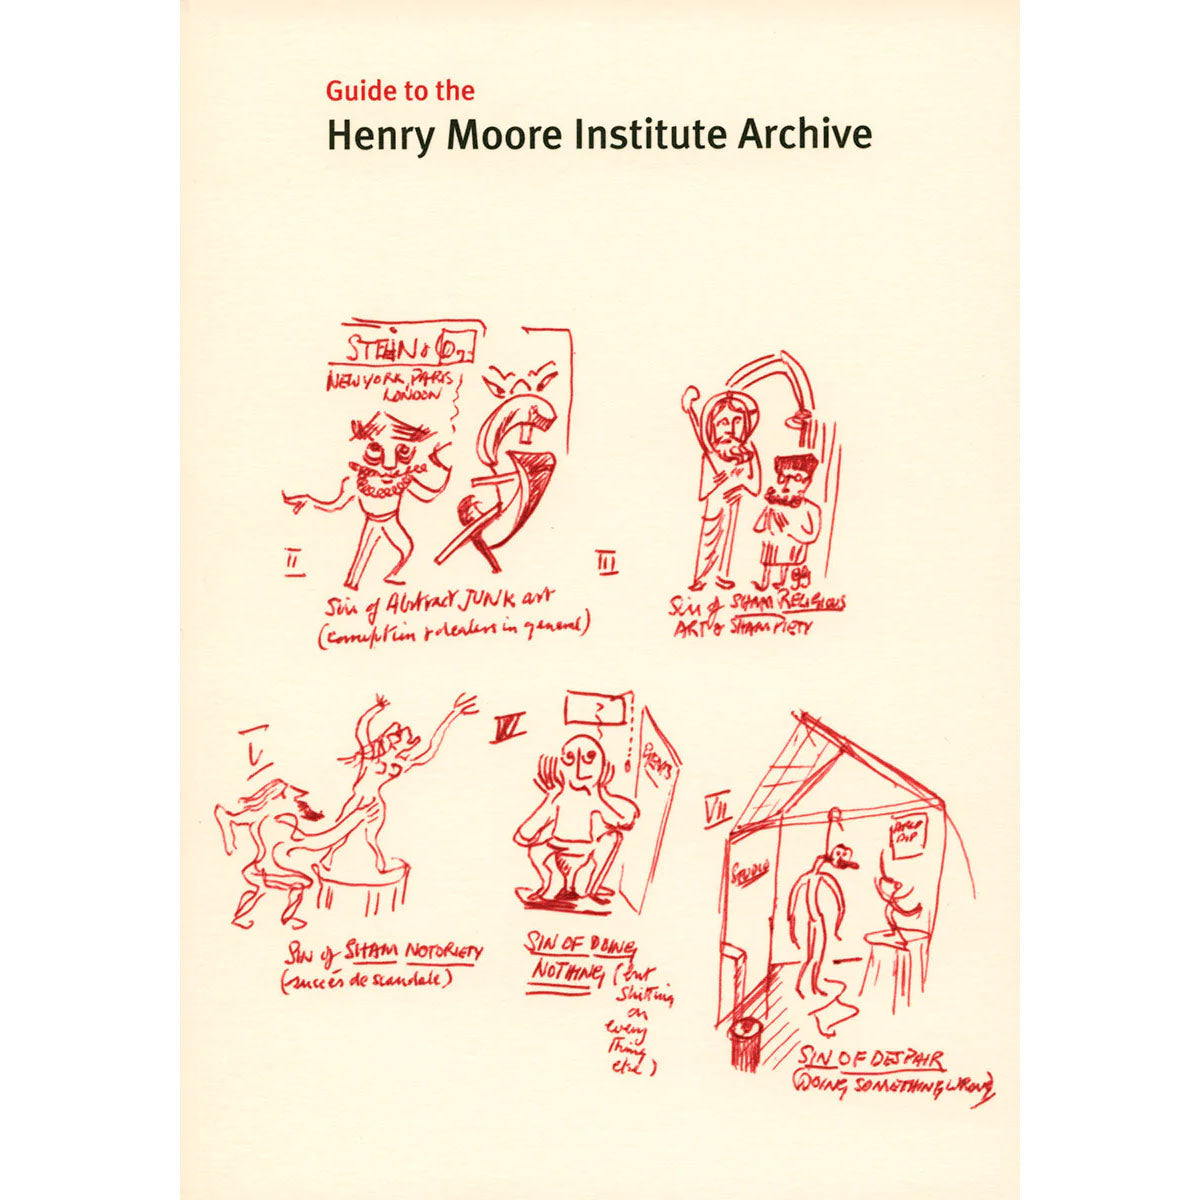 Guide to the Henry Moore Institute Archive